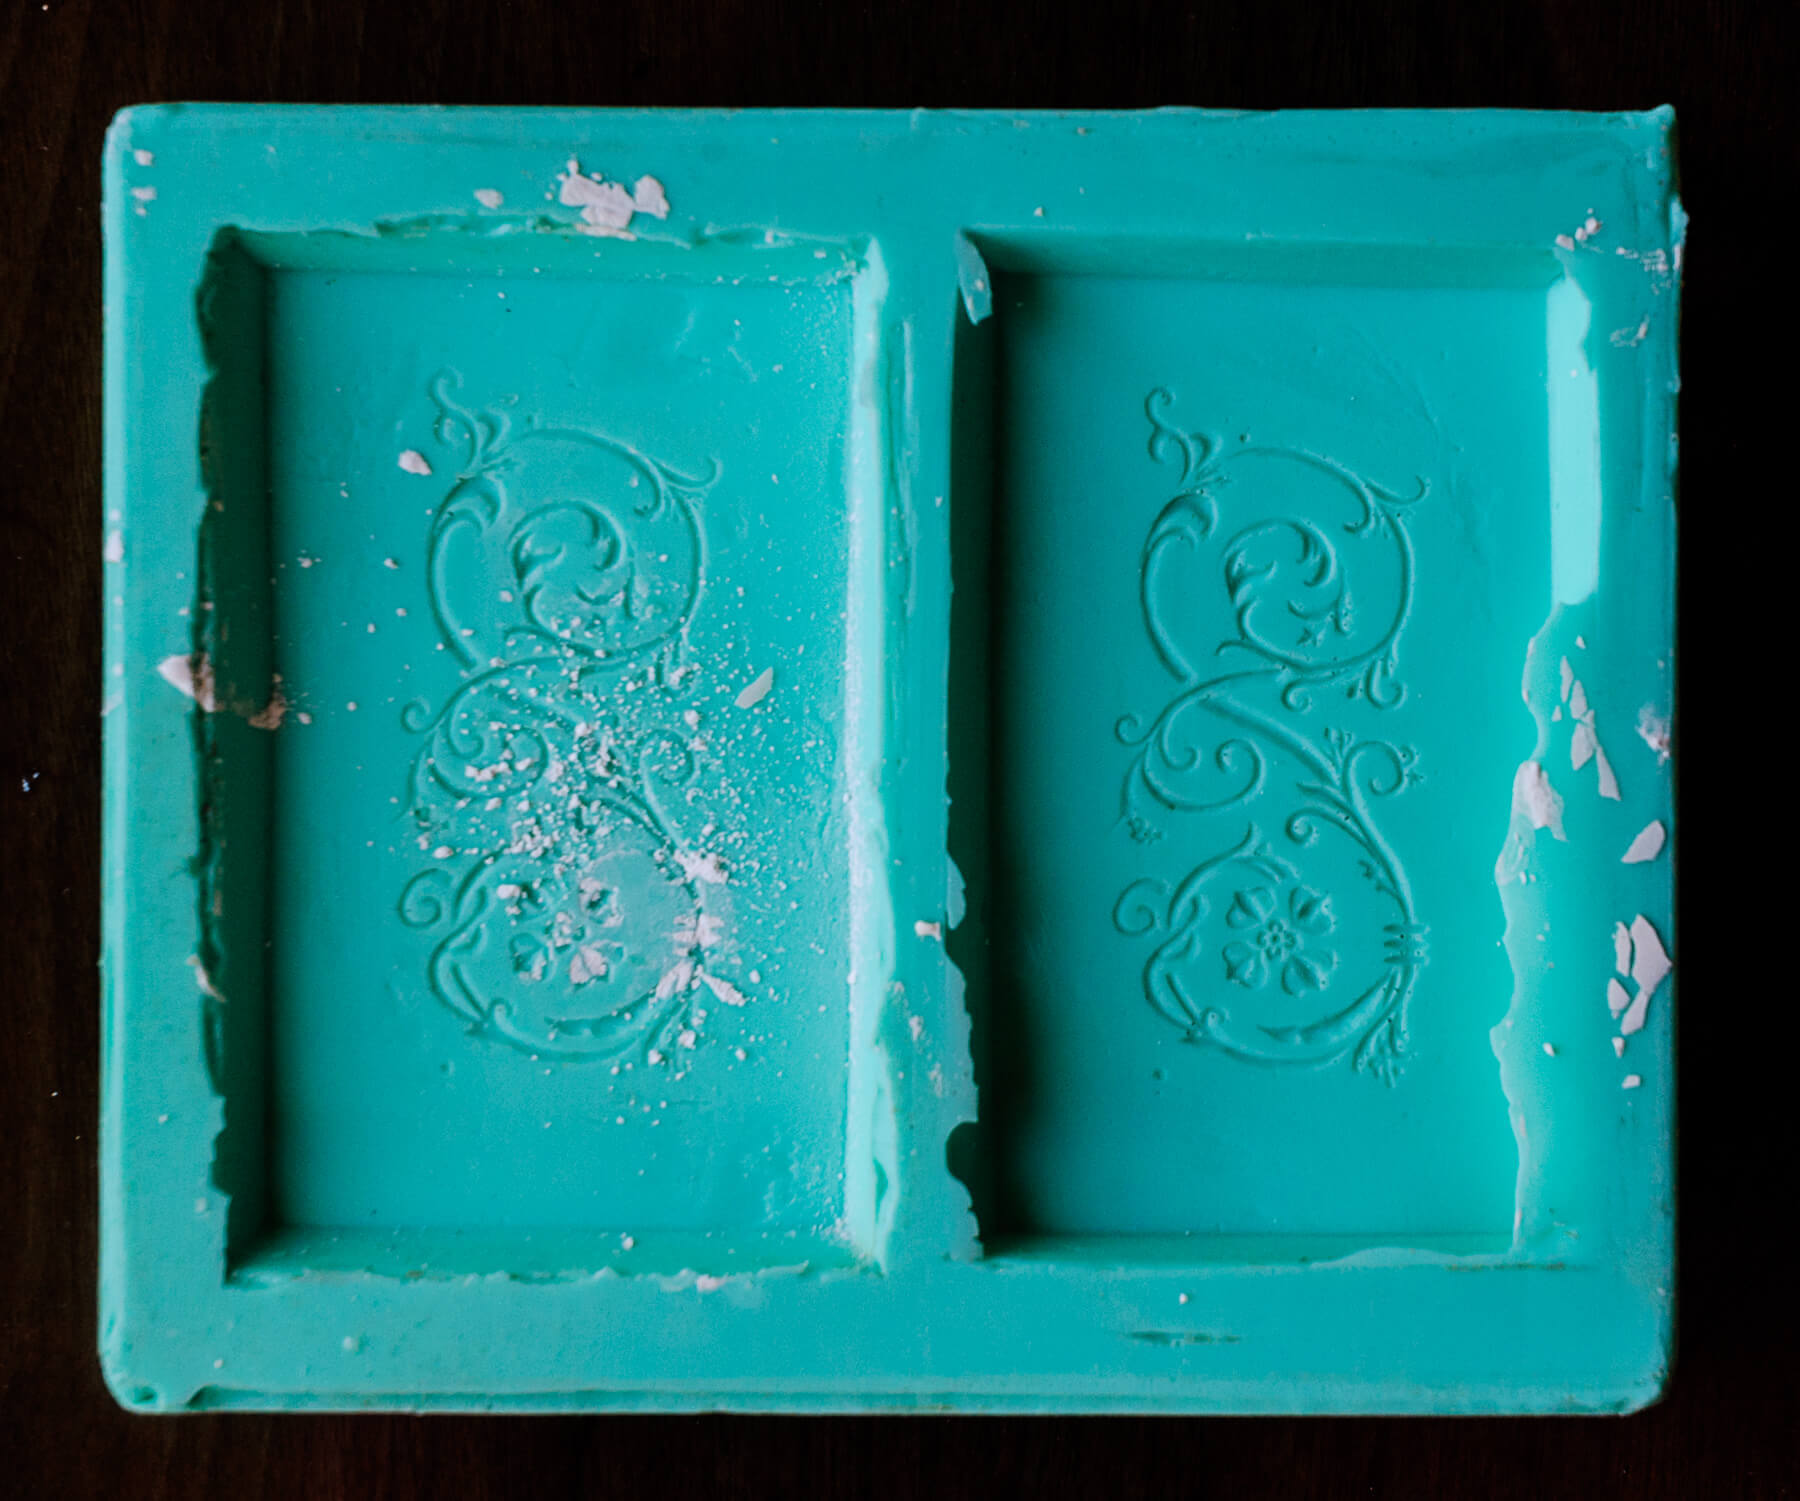 This is the mold created from the plaster-positives of the design motif.